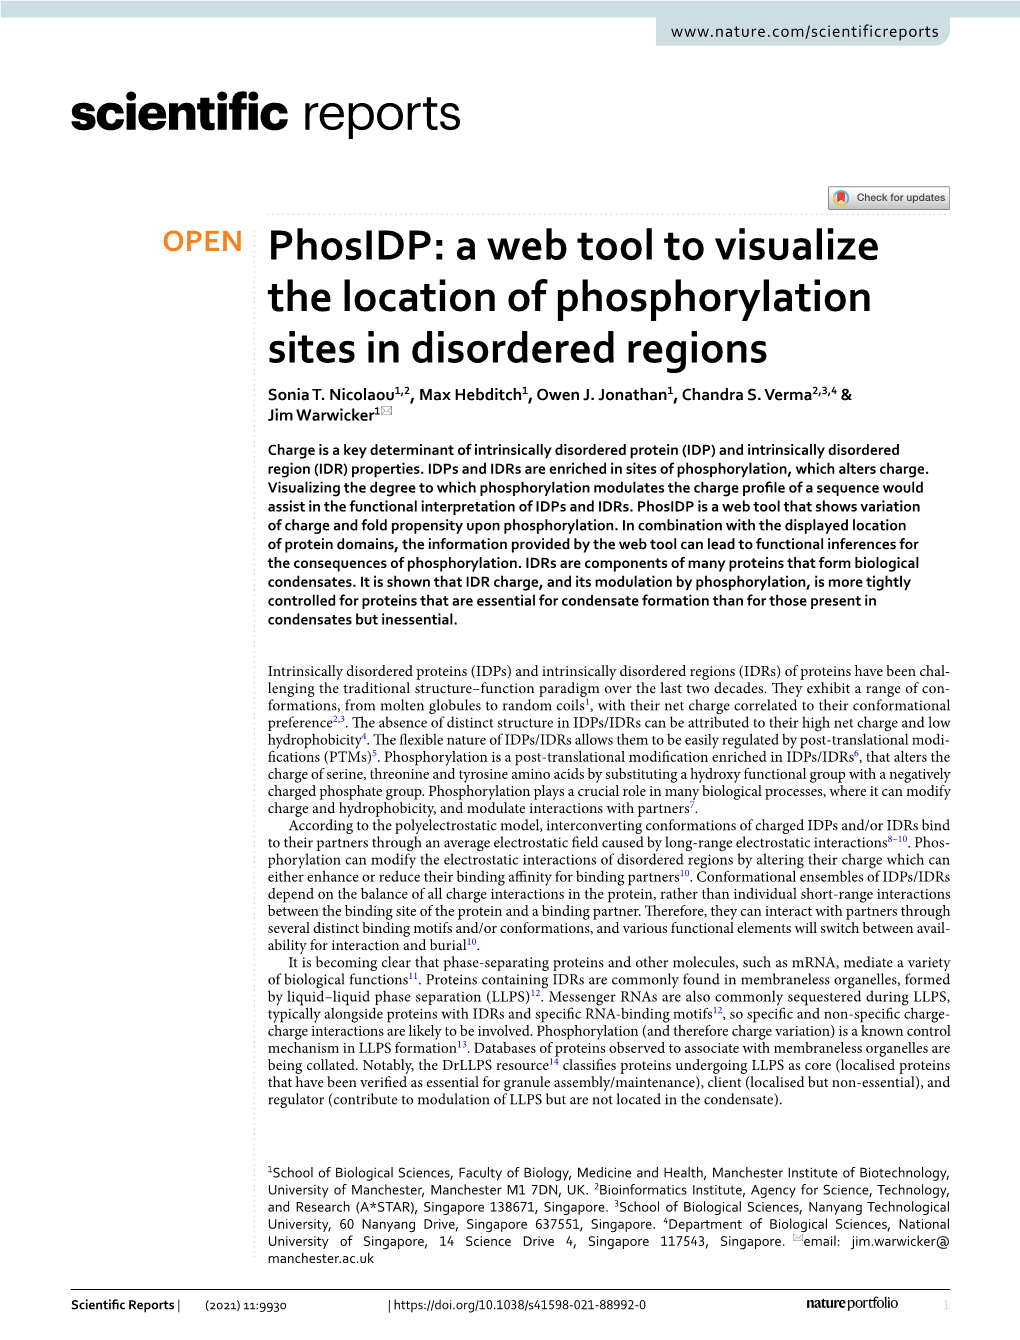 A Web Tool to Visualize the Location of Phosphorylation Sites in Disordered Regions Sonia T